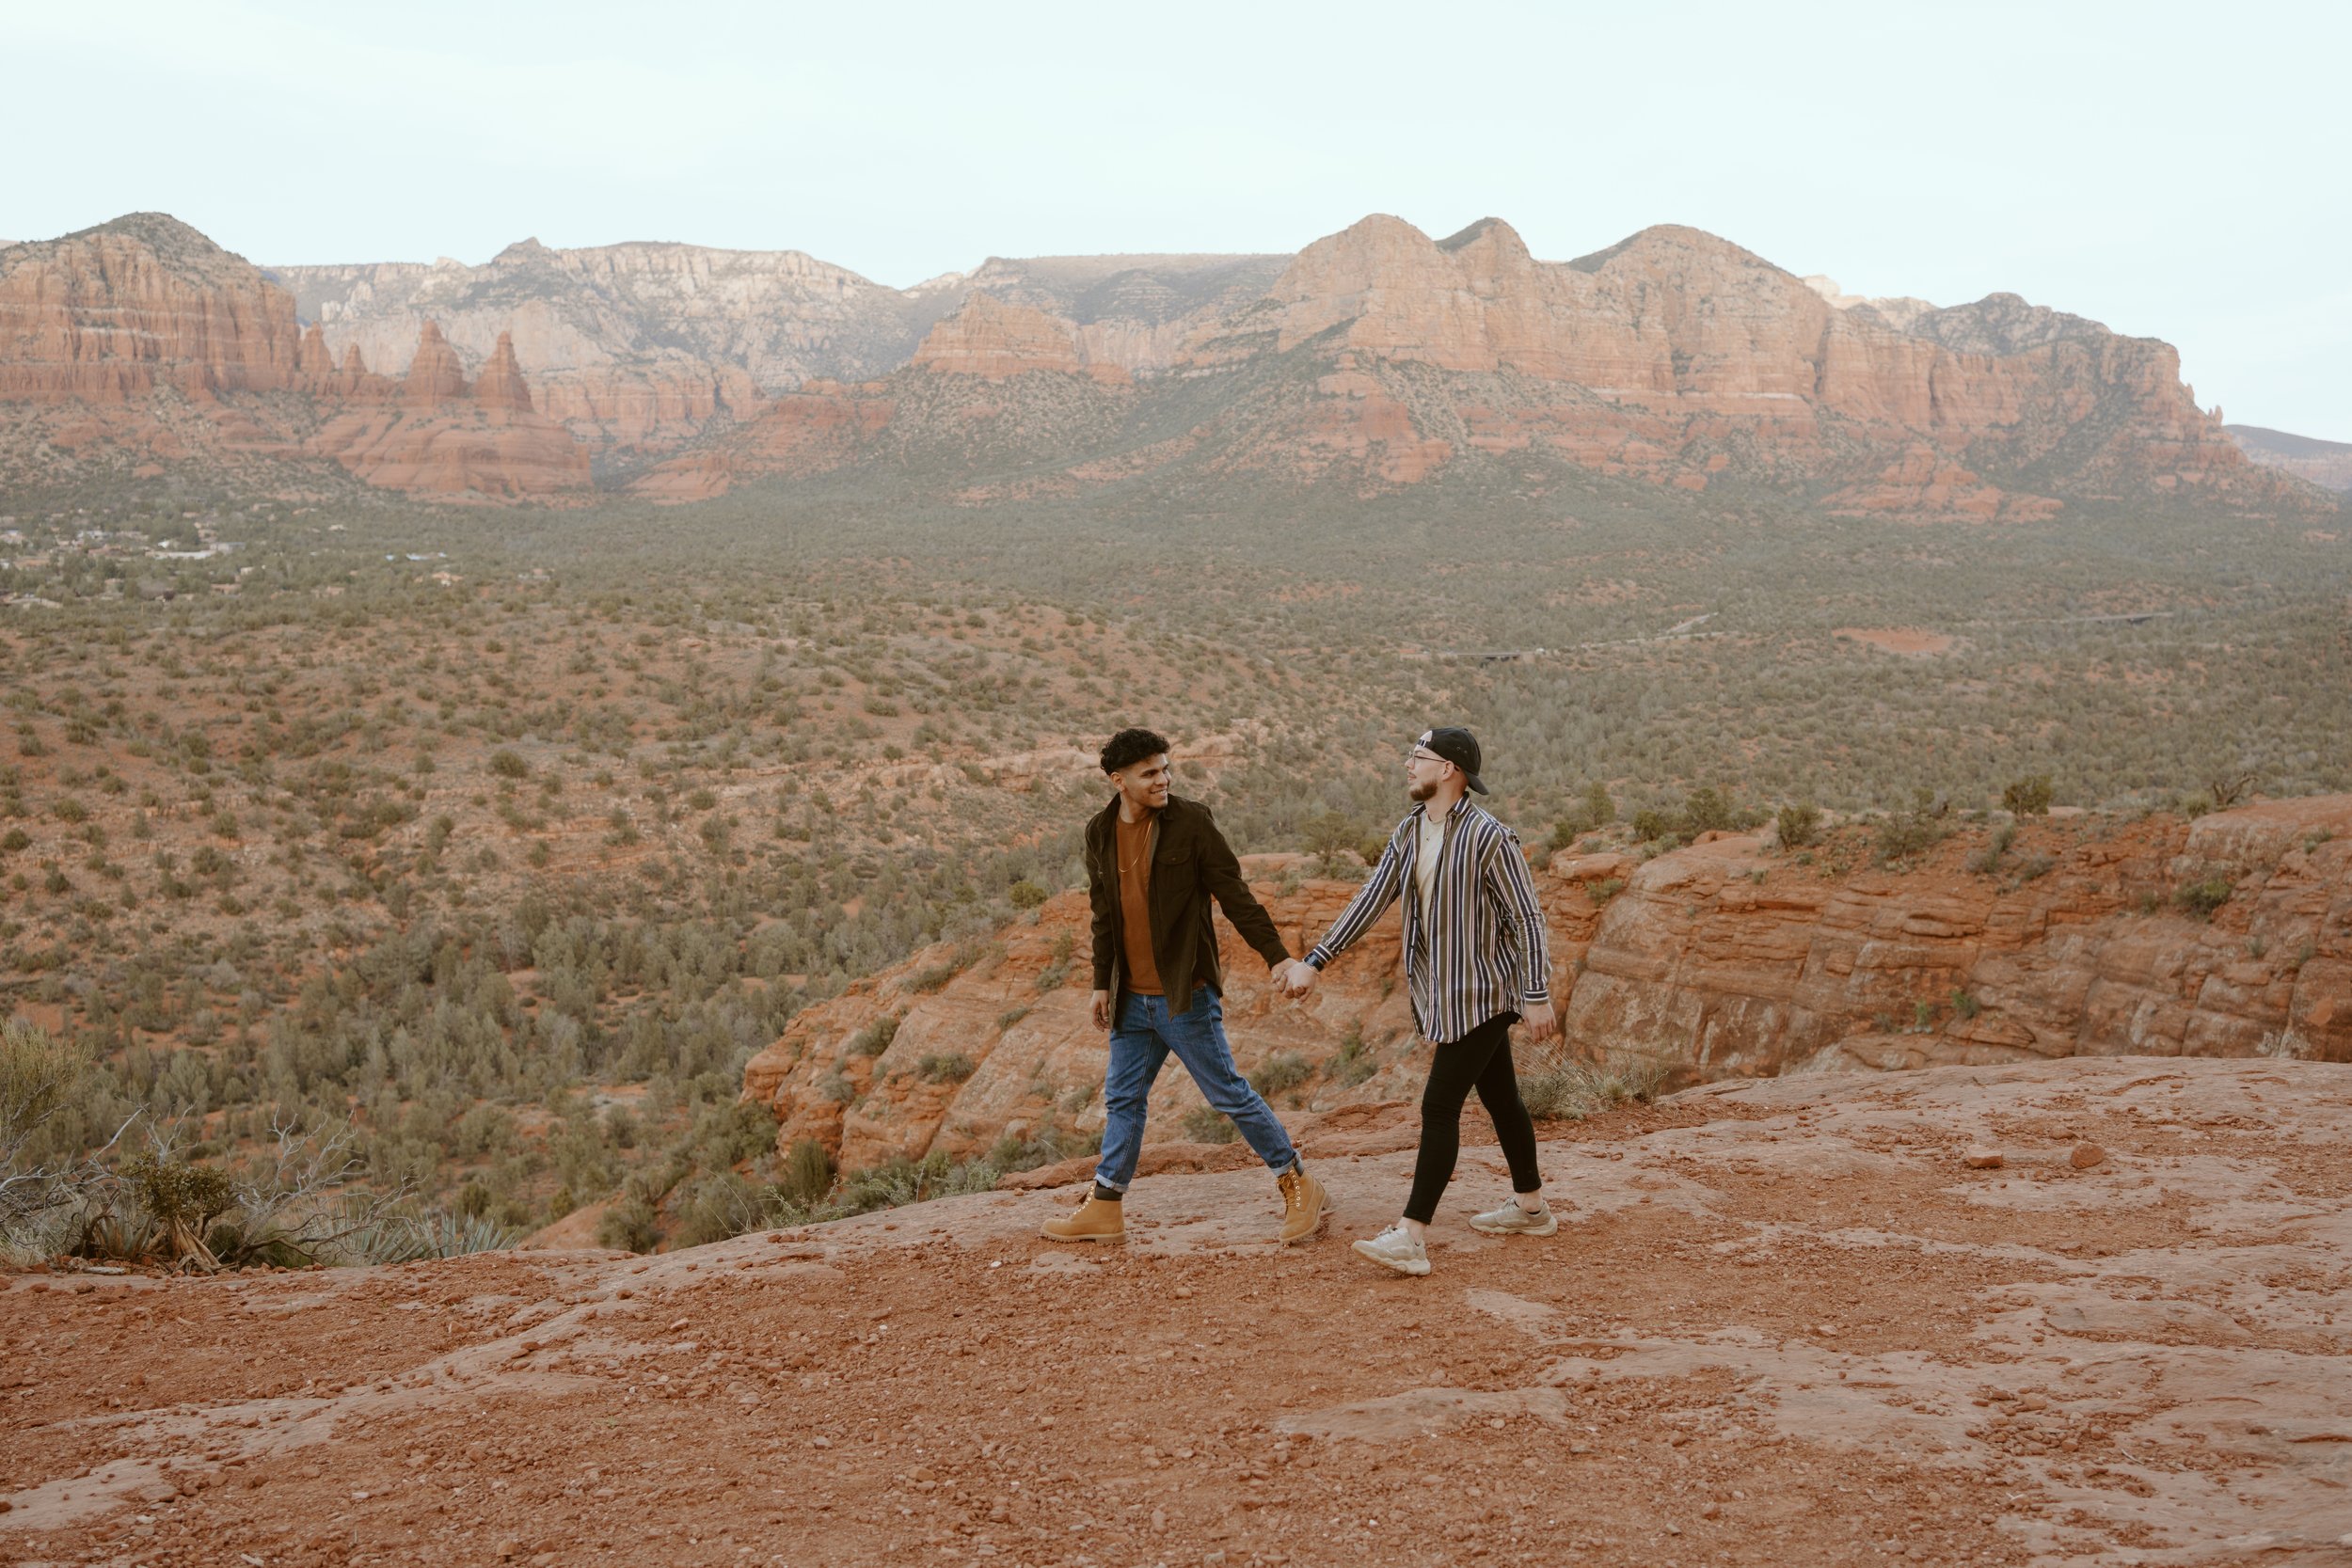 Cathedral Rock Proposal | Sedona, Arizona Engagement Photos | LGBTQ+ Love Story | Carrie Rogers Photography